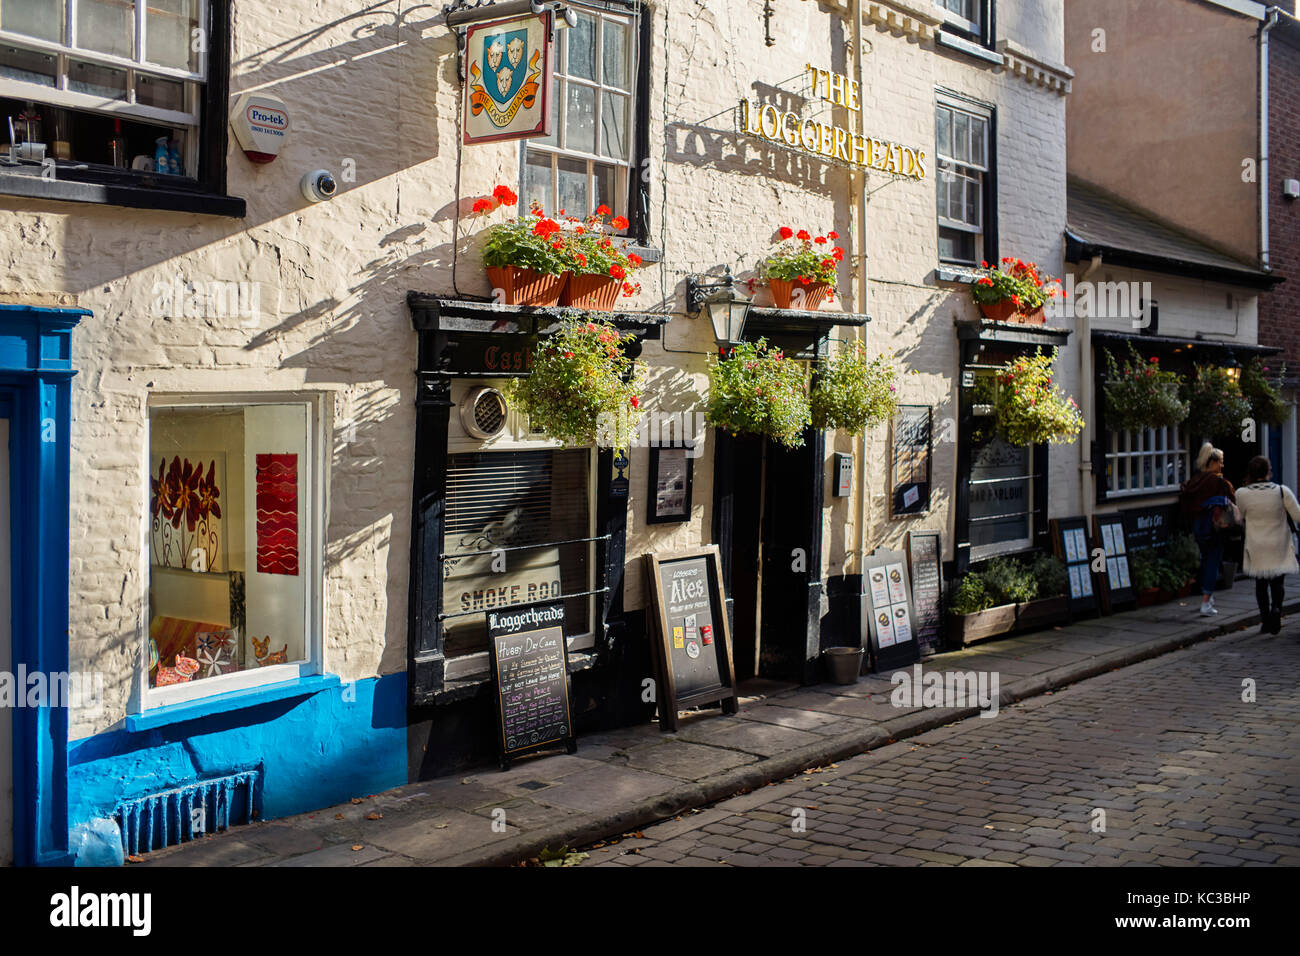 The Loggerhead pub in Shrewsbury with hubby day care sign outside Stock Photo